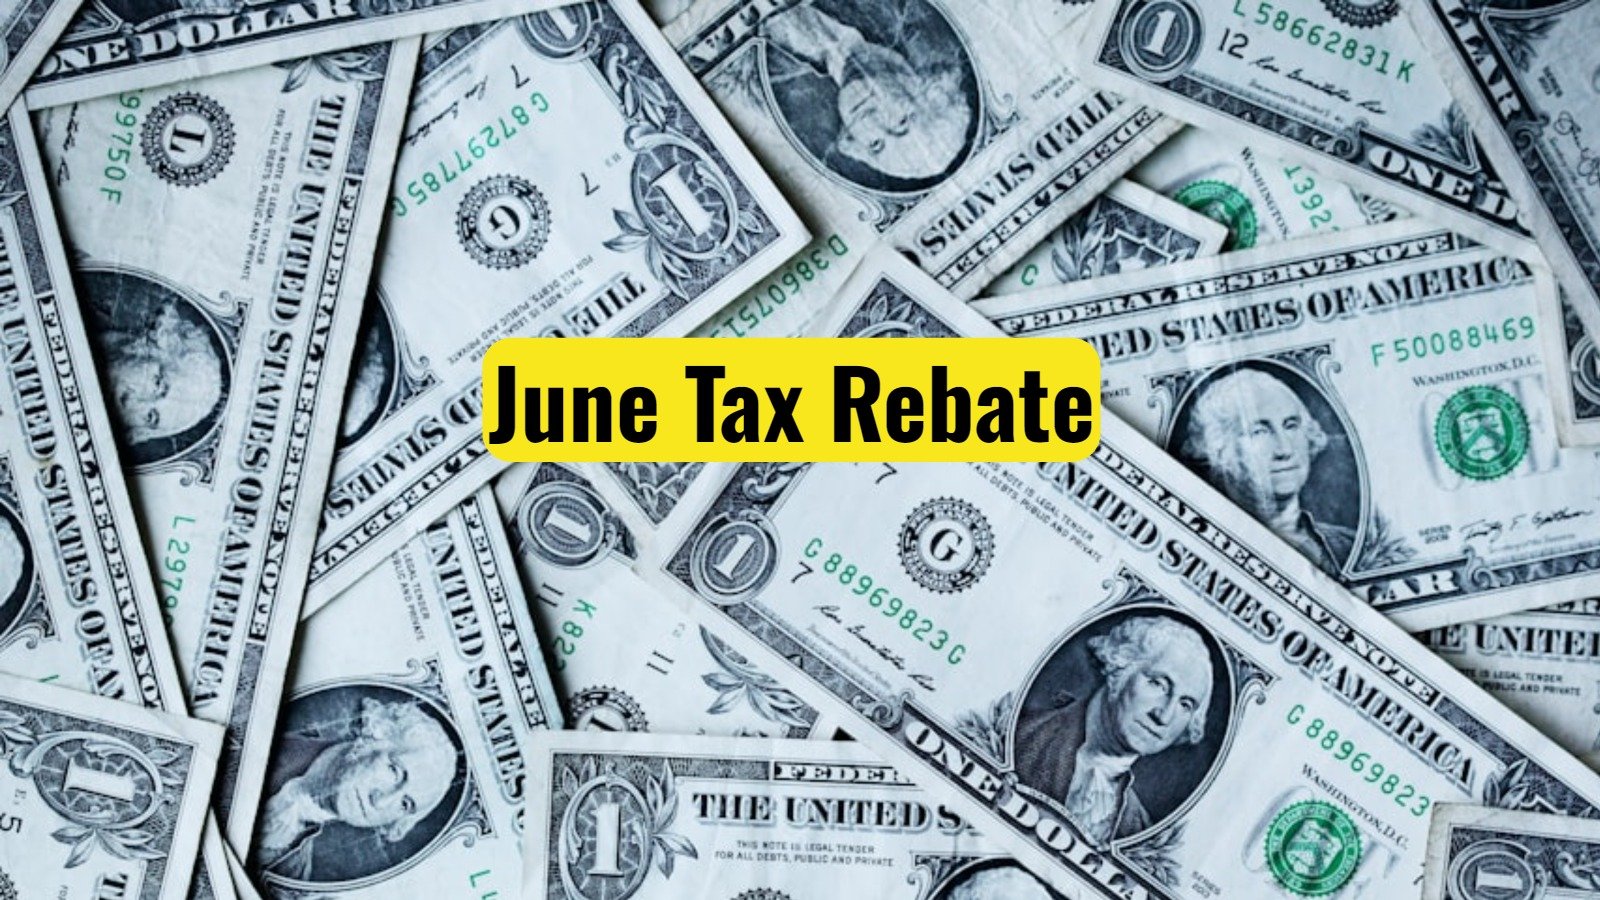 June Tax Rebate Up to $1,000 Payment to be Distributed - Find Out Who Qualifies